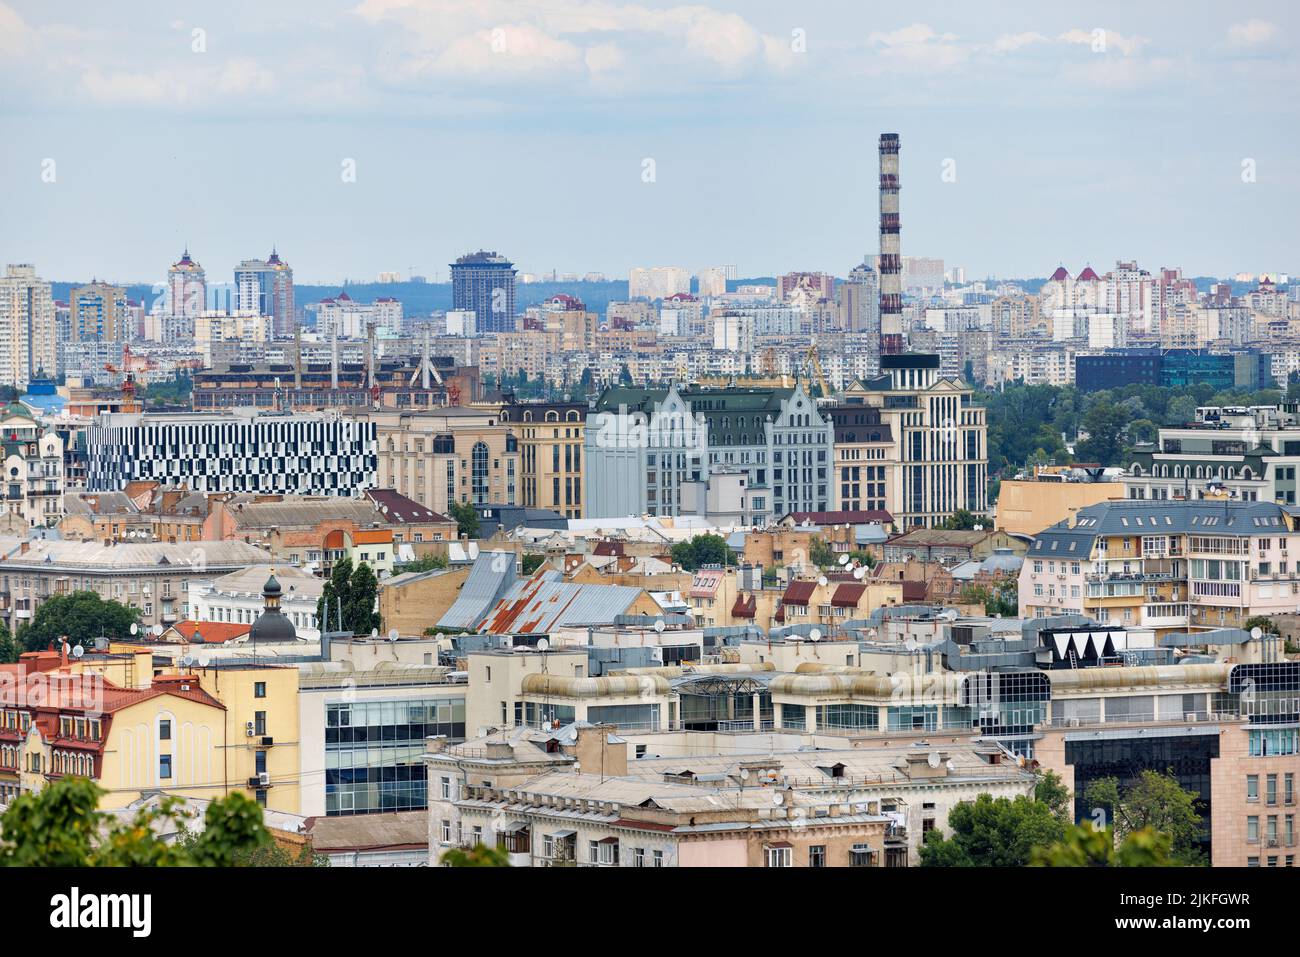 Aerial view, cityscape of Kyiv, view of old and new residential areas under construction on a summer day. Stock Photo